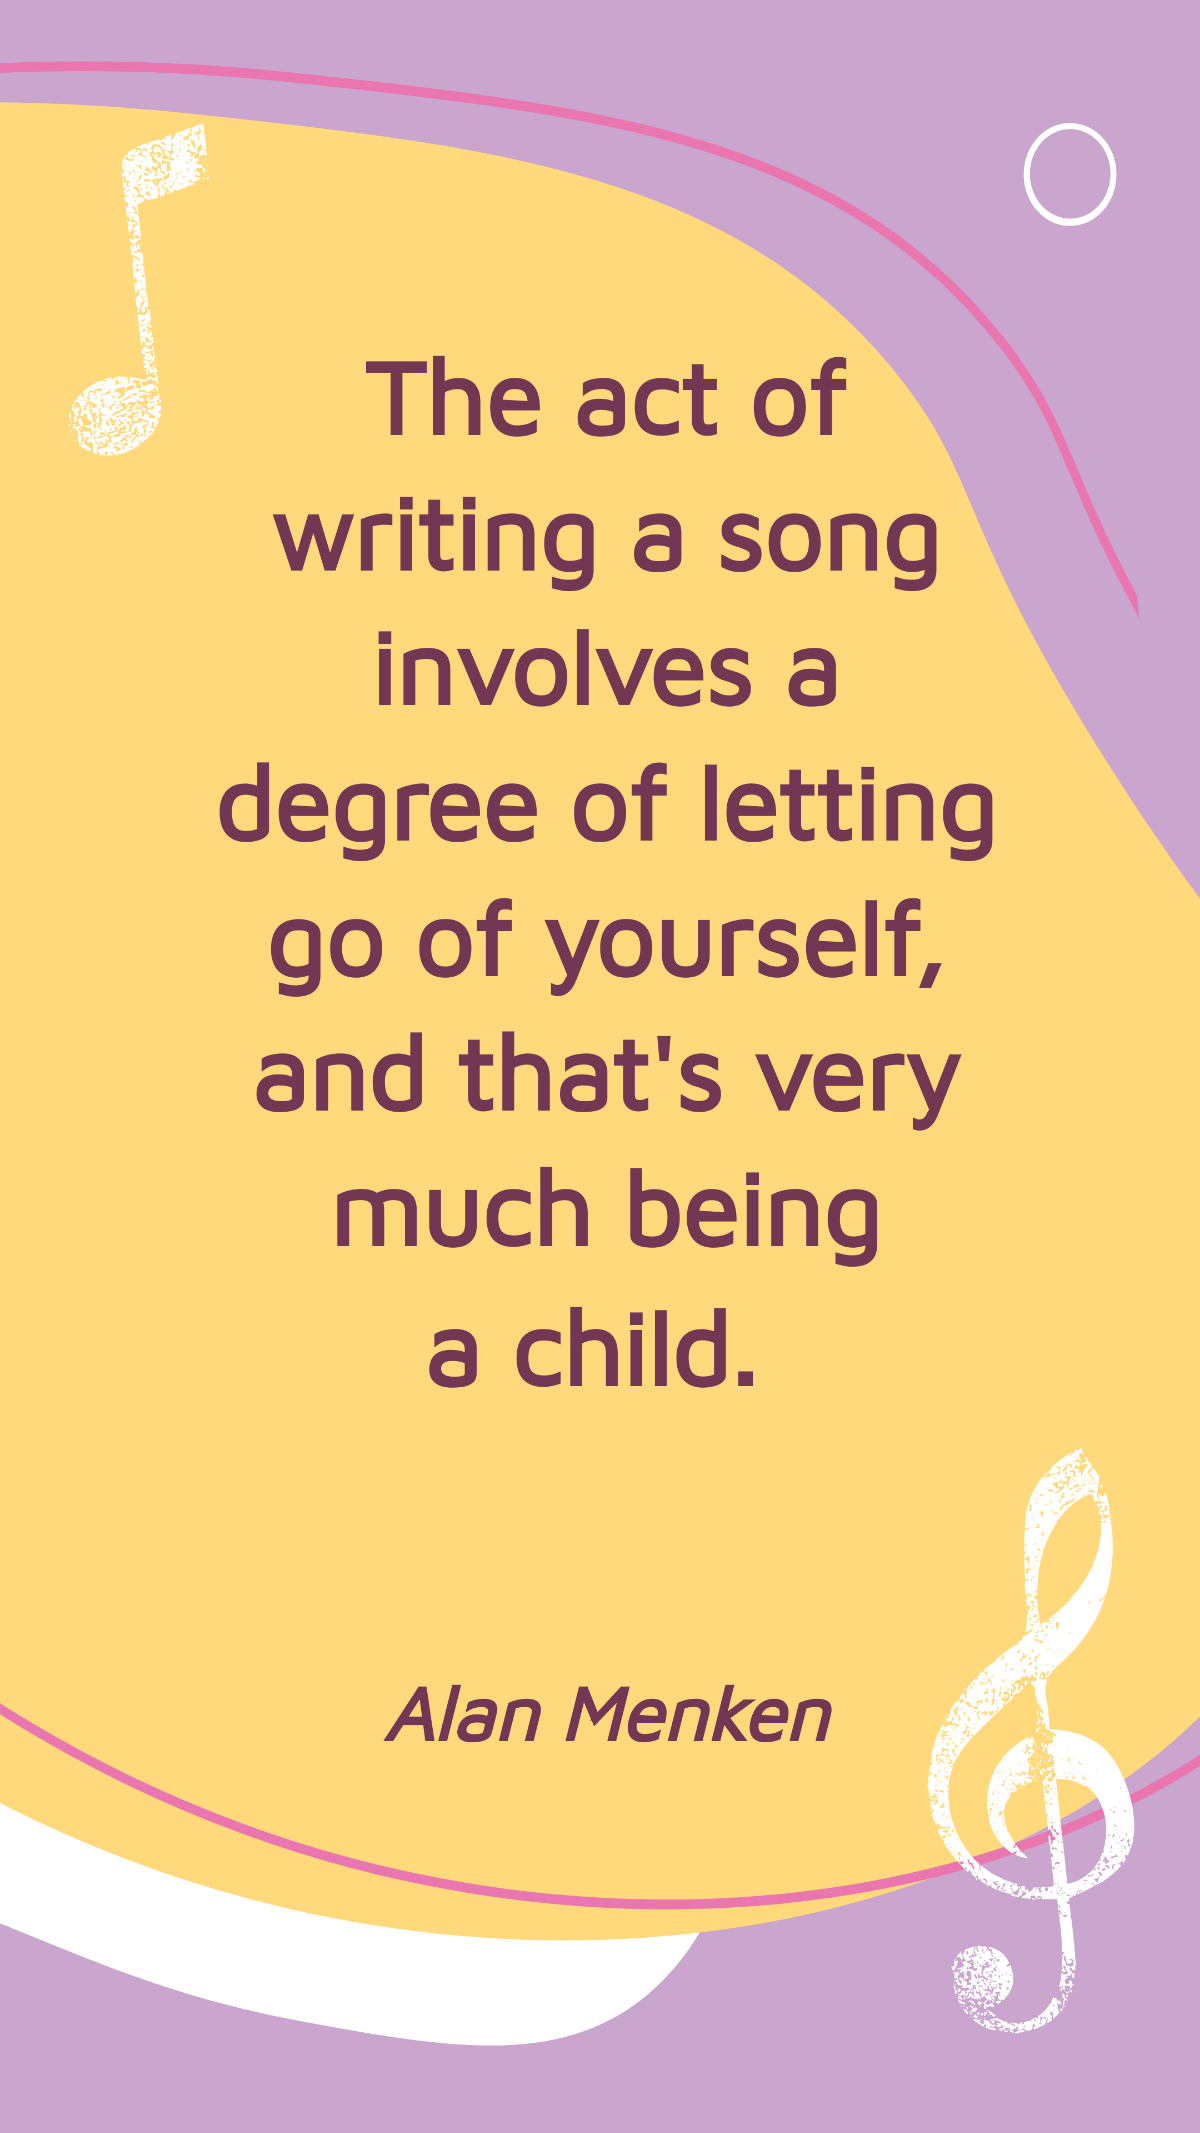 Alan Menken - The act of writing a song involves a degree of letting go of yourself, and that's very much being a child. Template